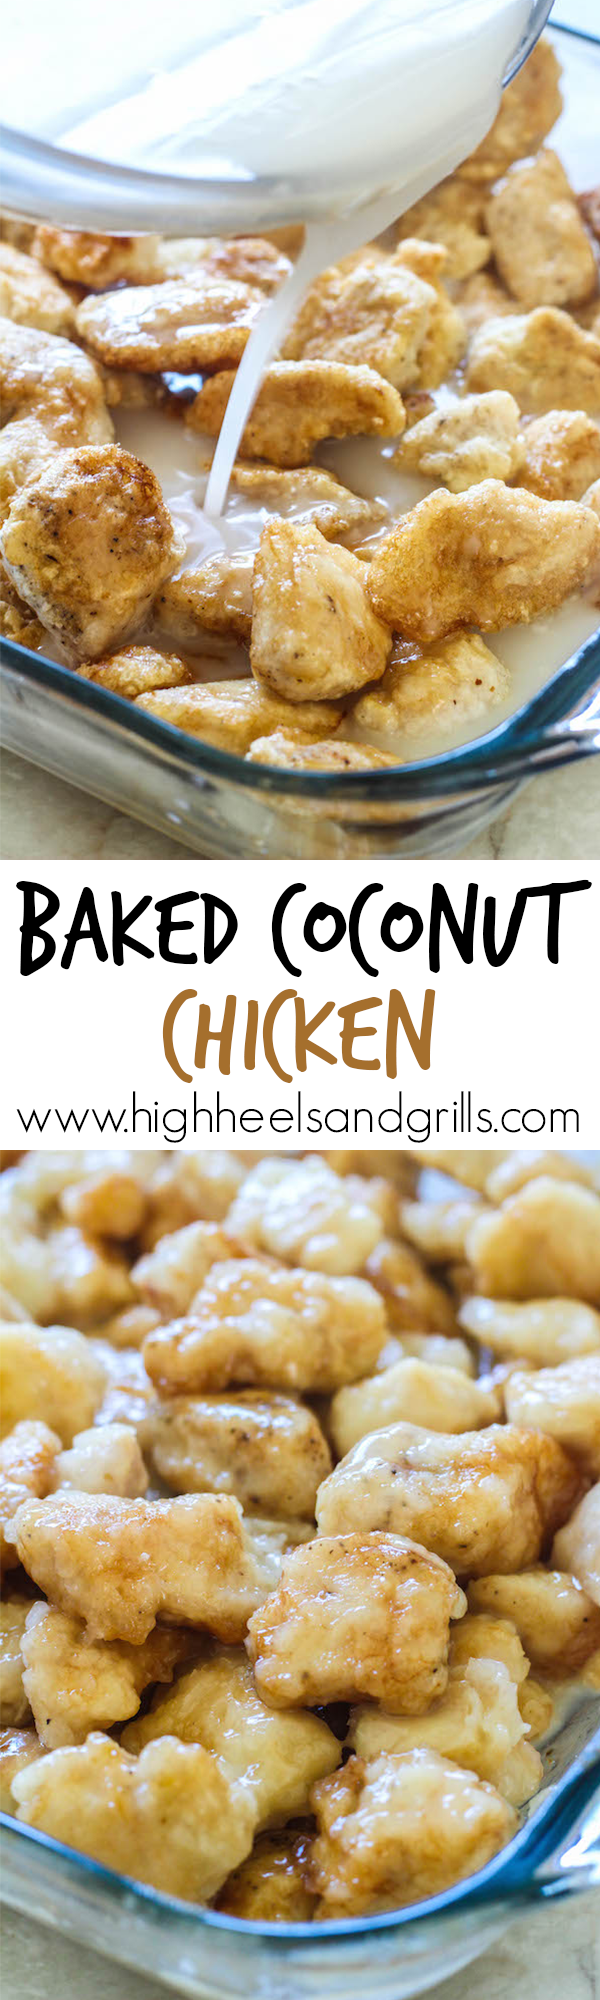 Baked Coconut Chicken. Better than take-out and so easy to make! This will be your new favorite dinner recipe.